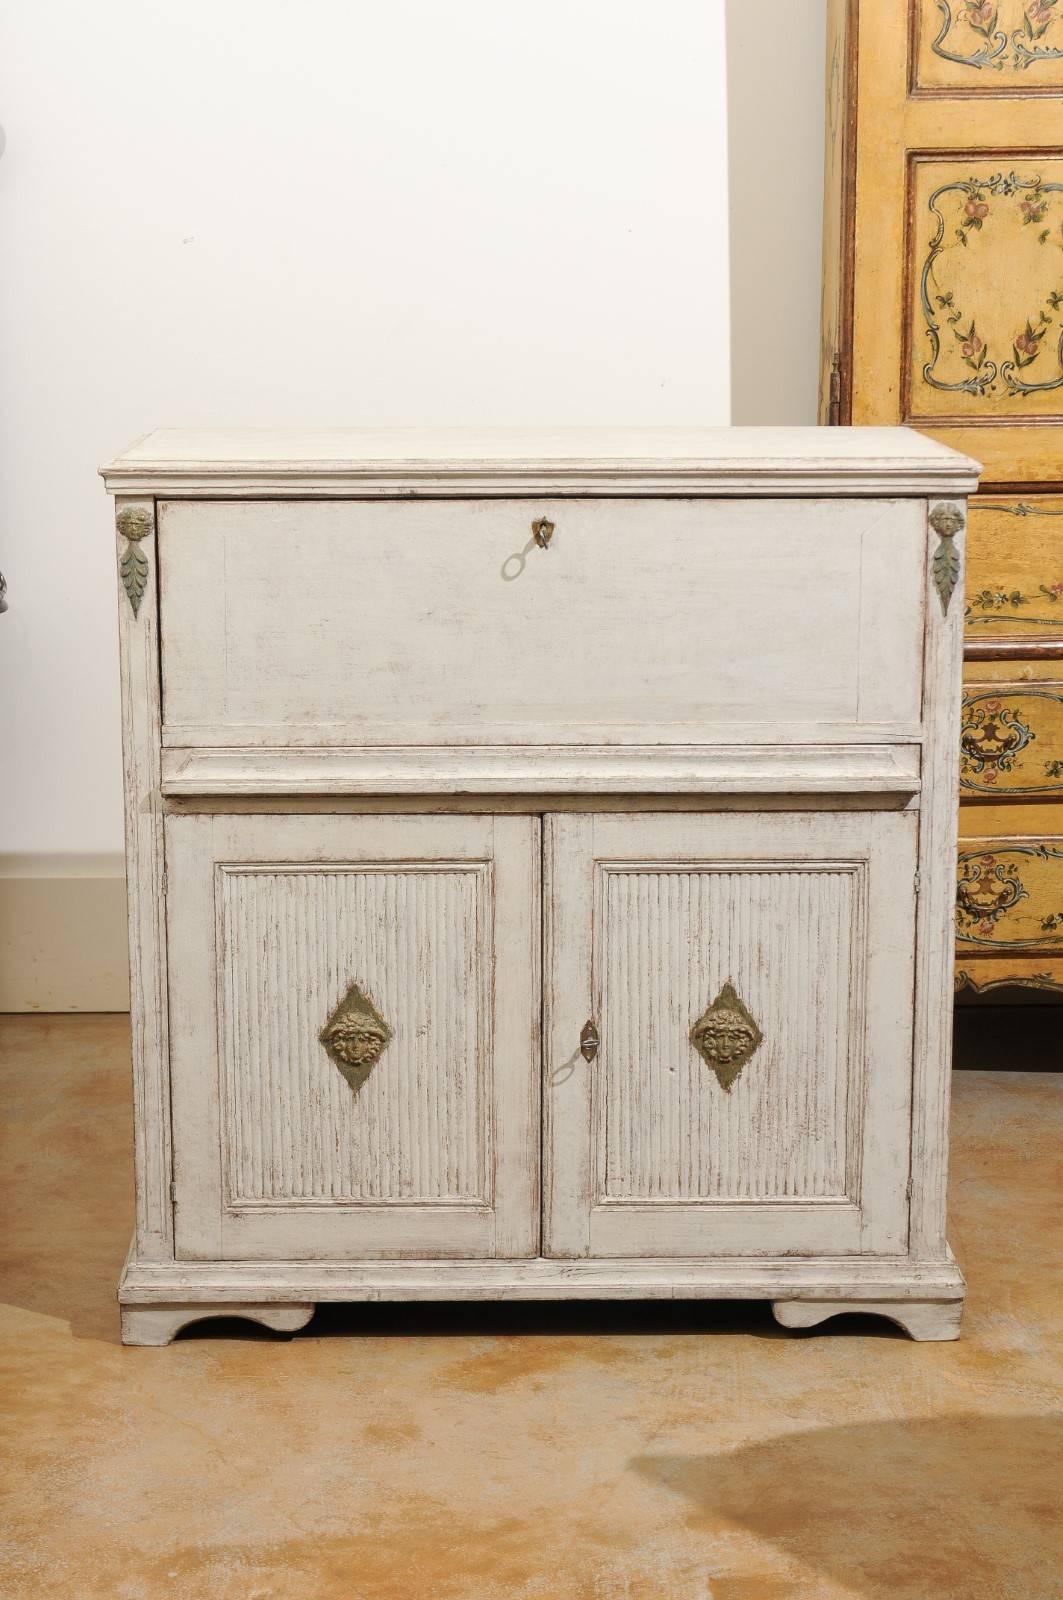 19th Century Swedish Gustavian Period 1820s Drop-Front Painted Secretary with Bronze Mounts